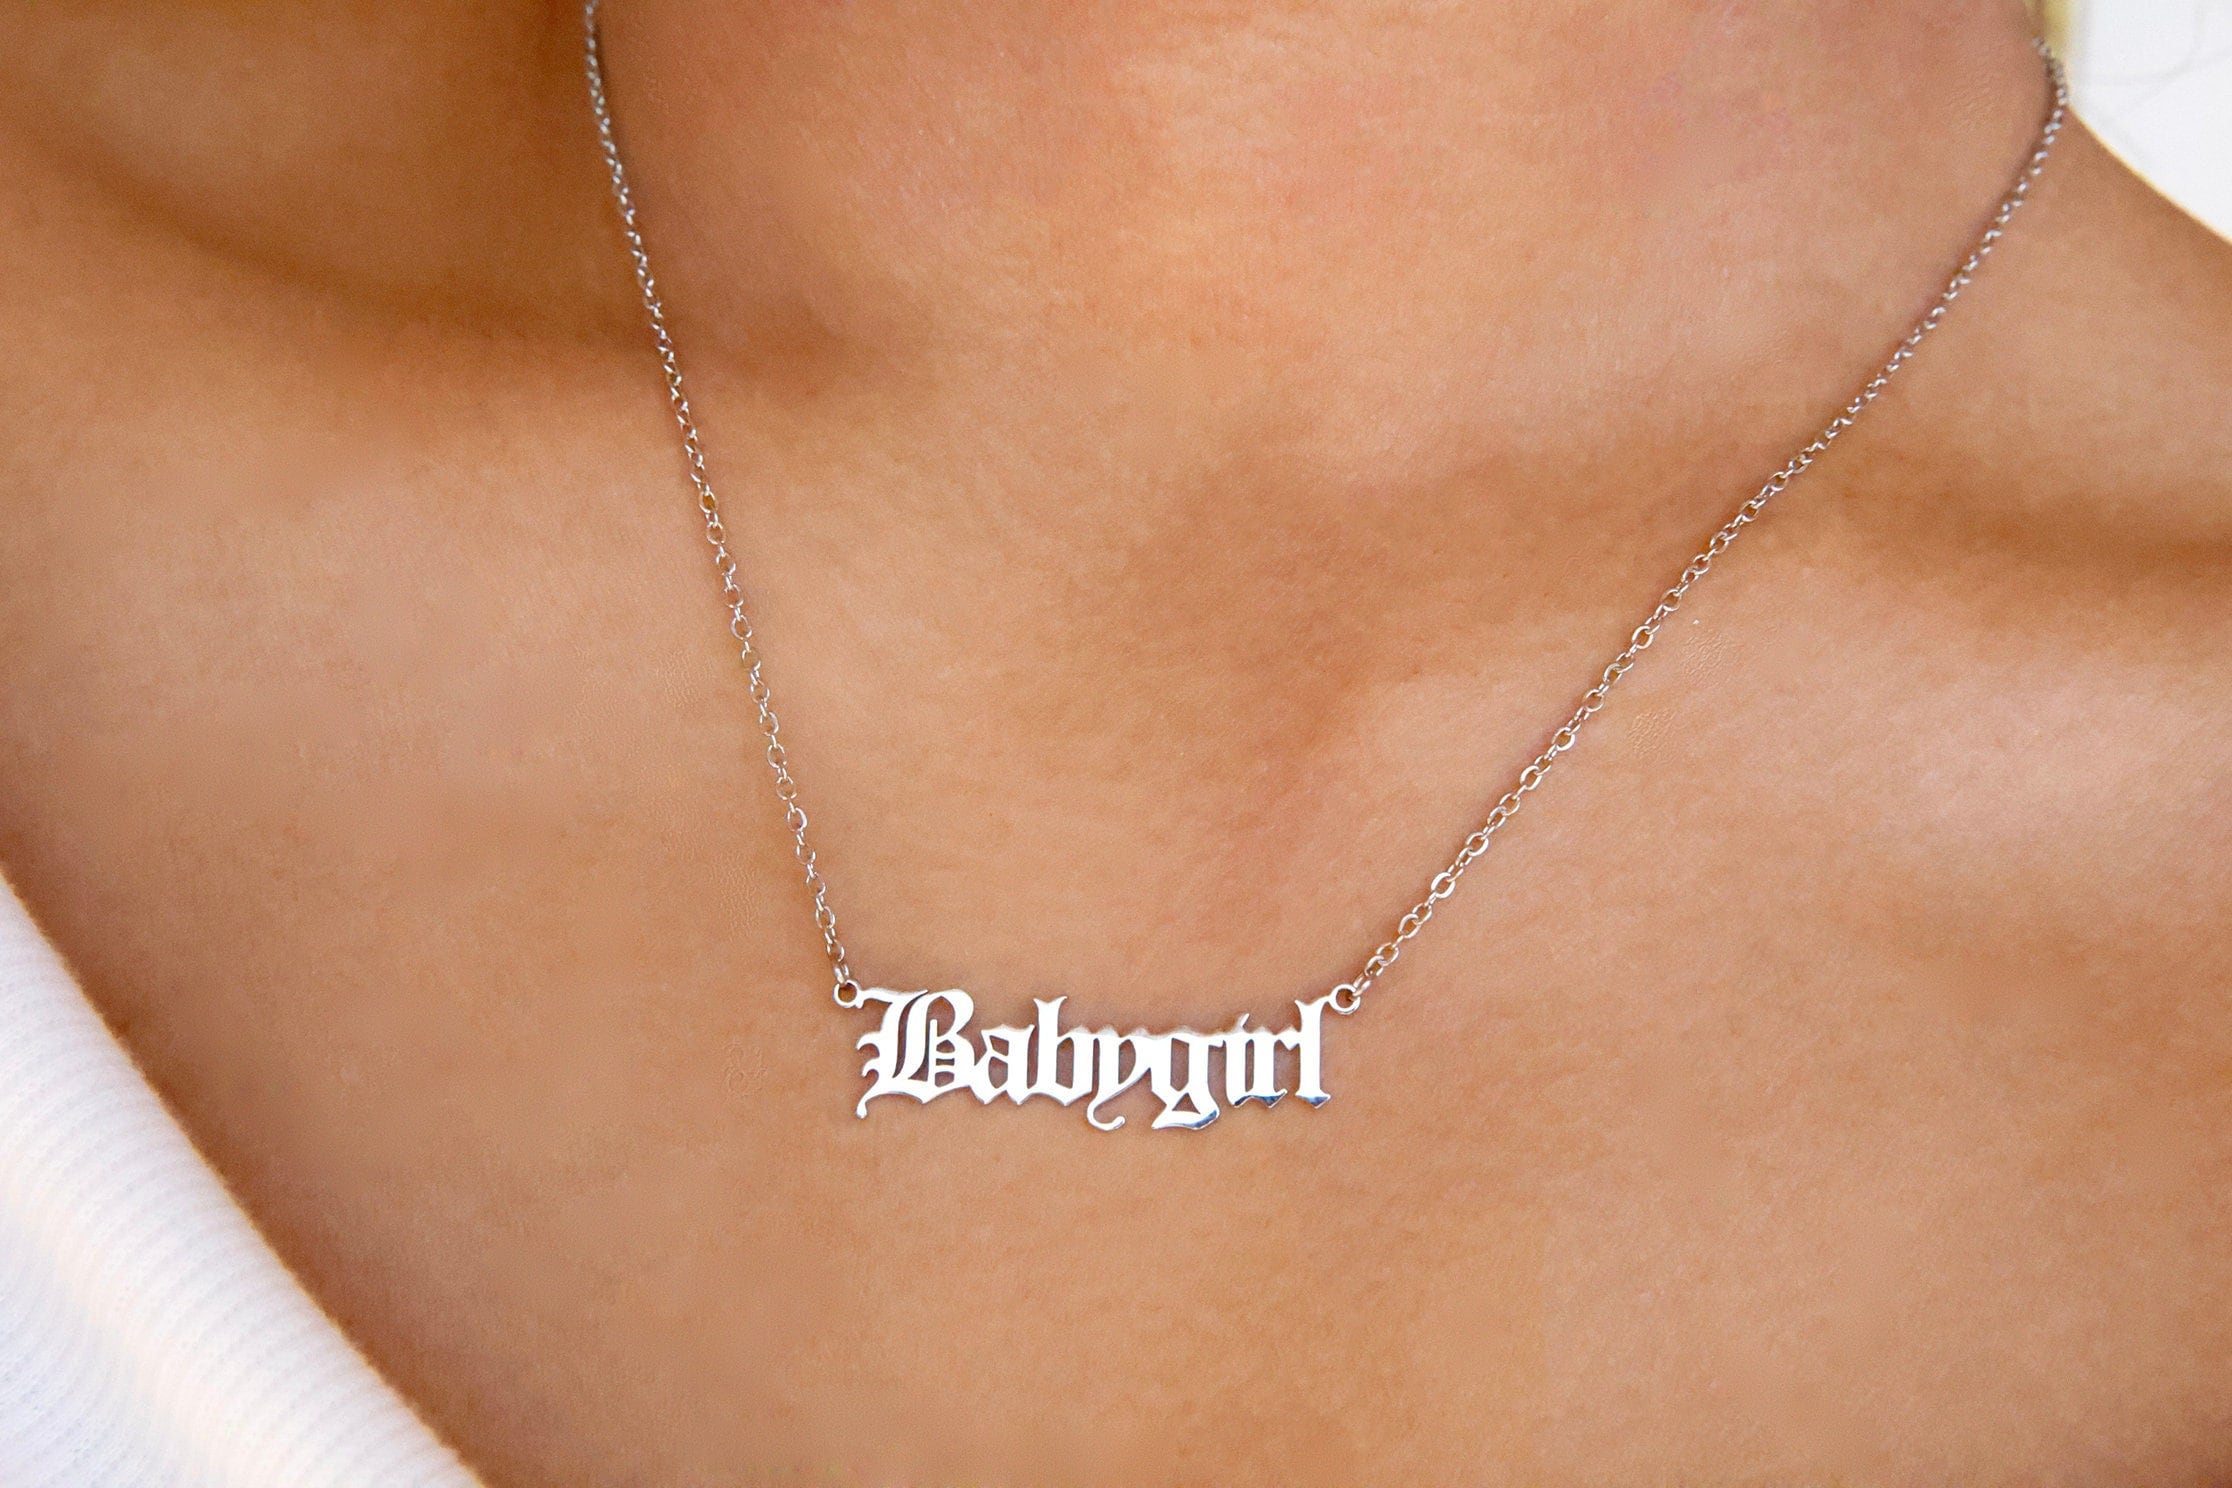 Look At My Babygirl Necklace - Gold | Babygirl necklace, Necklace, Gold  necklace